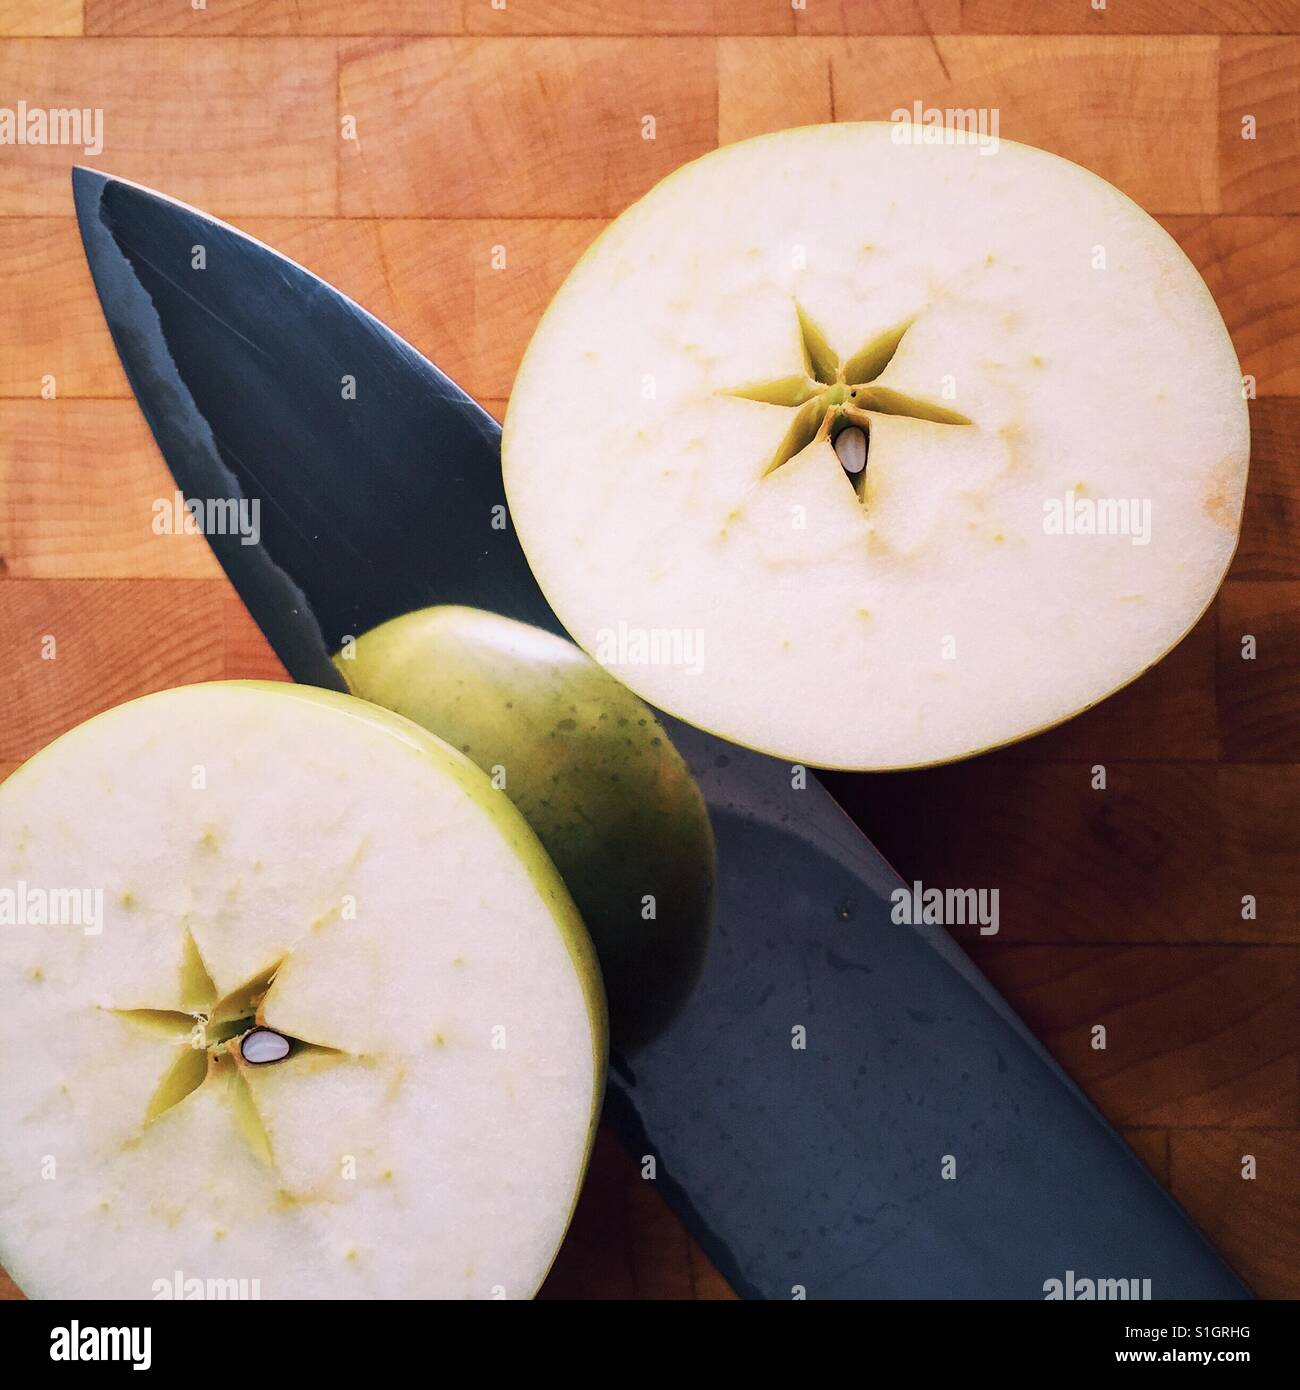 A close-up shot of an organic Orin apple cut in half resting on a cutting board with a knife Stock Photo